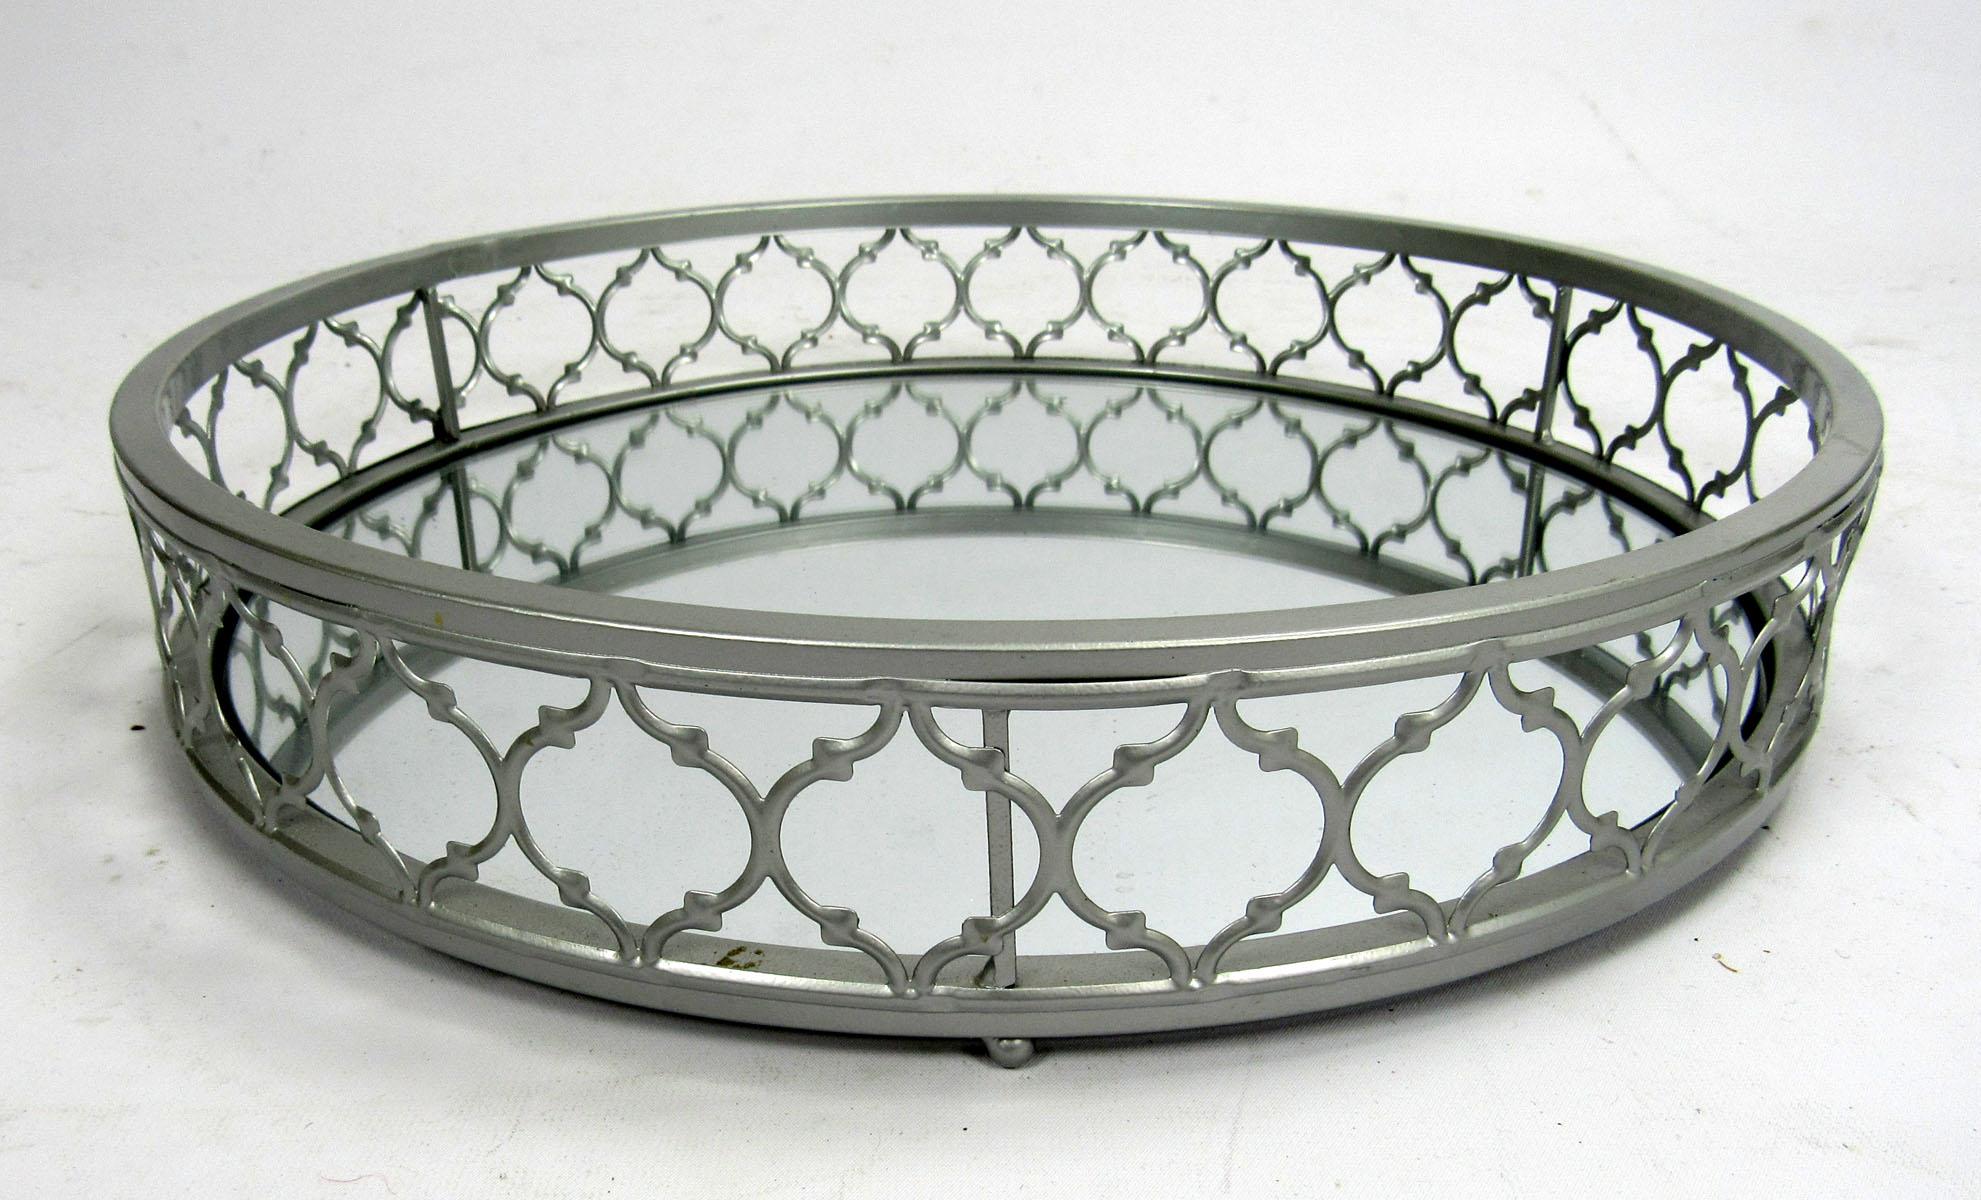 Round decorative tray with metal gallery and mirrored surface.